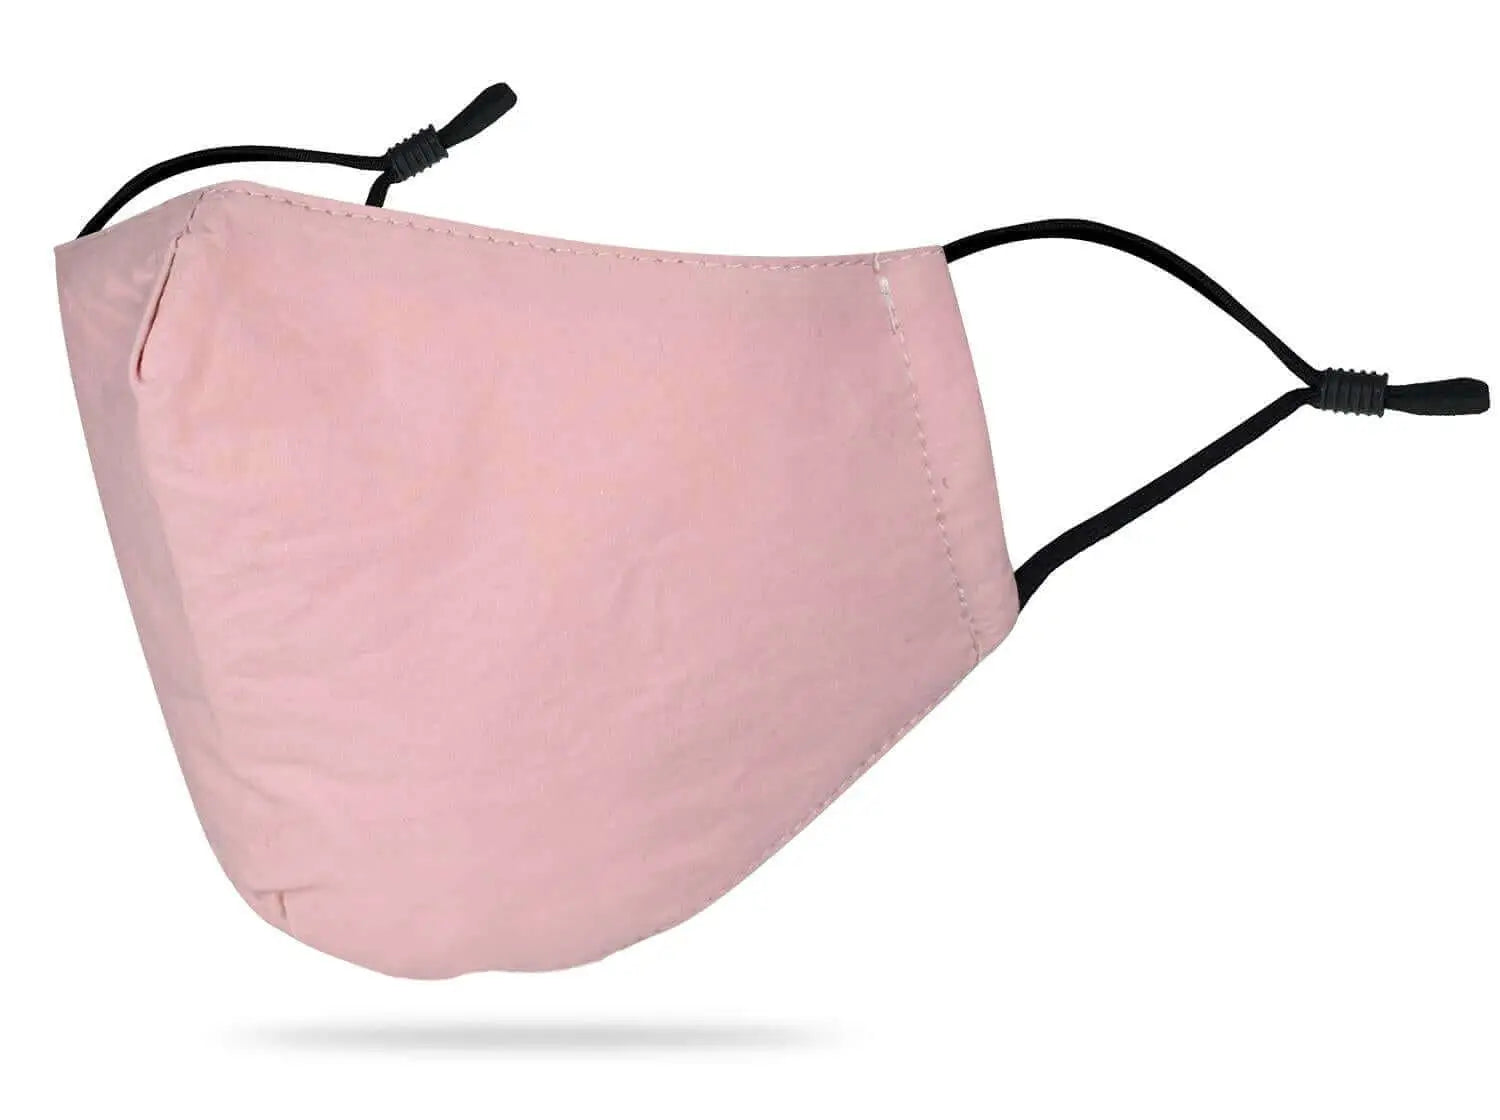 Pink cotton fashion face mask with black elastic straps.